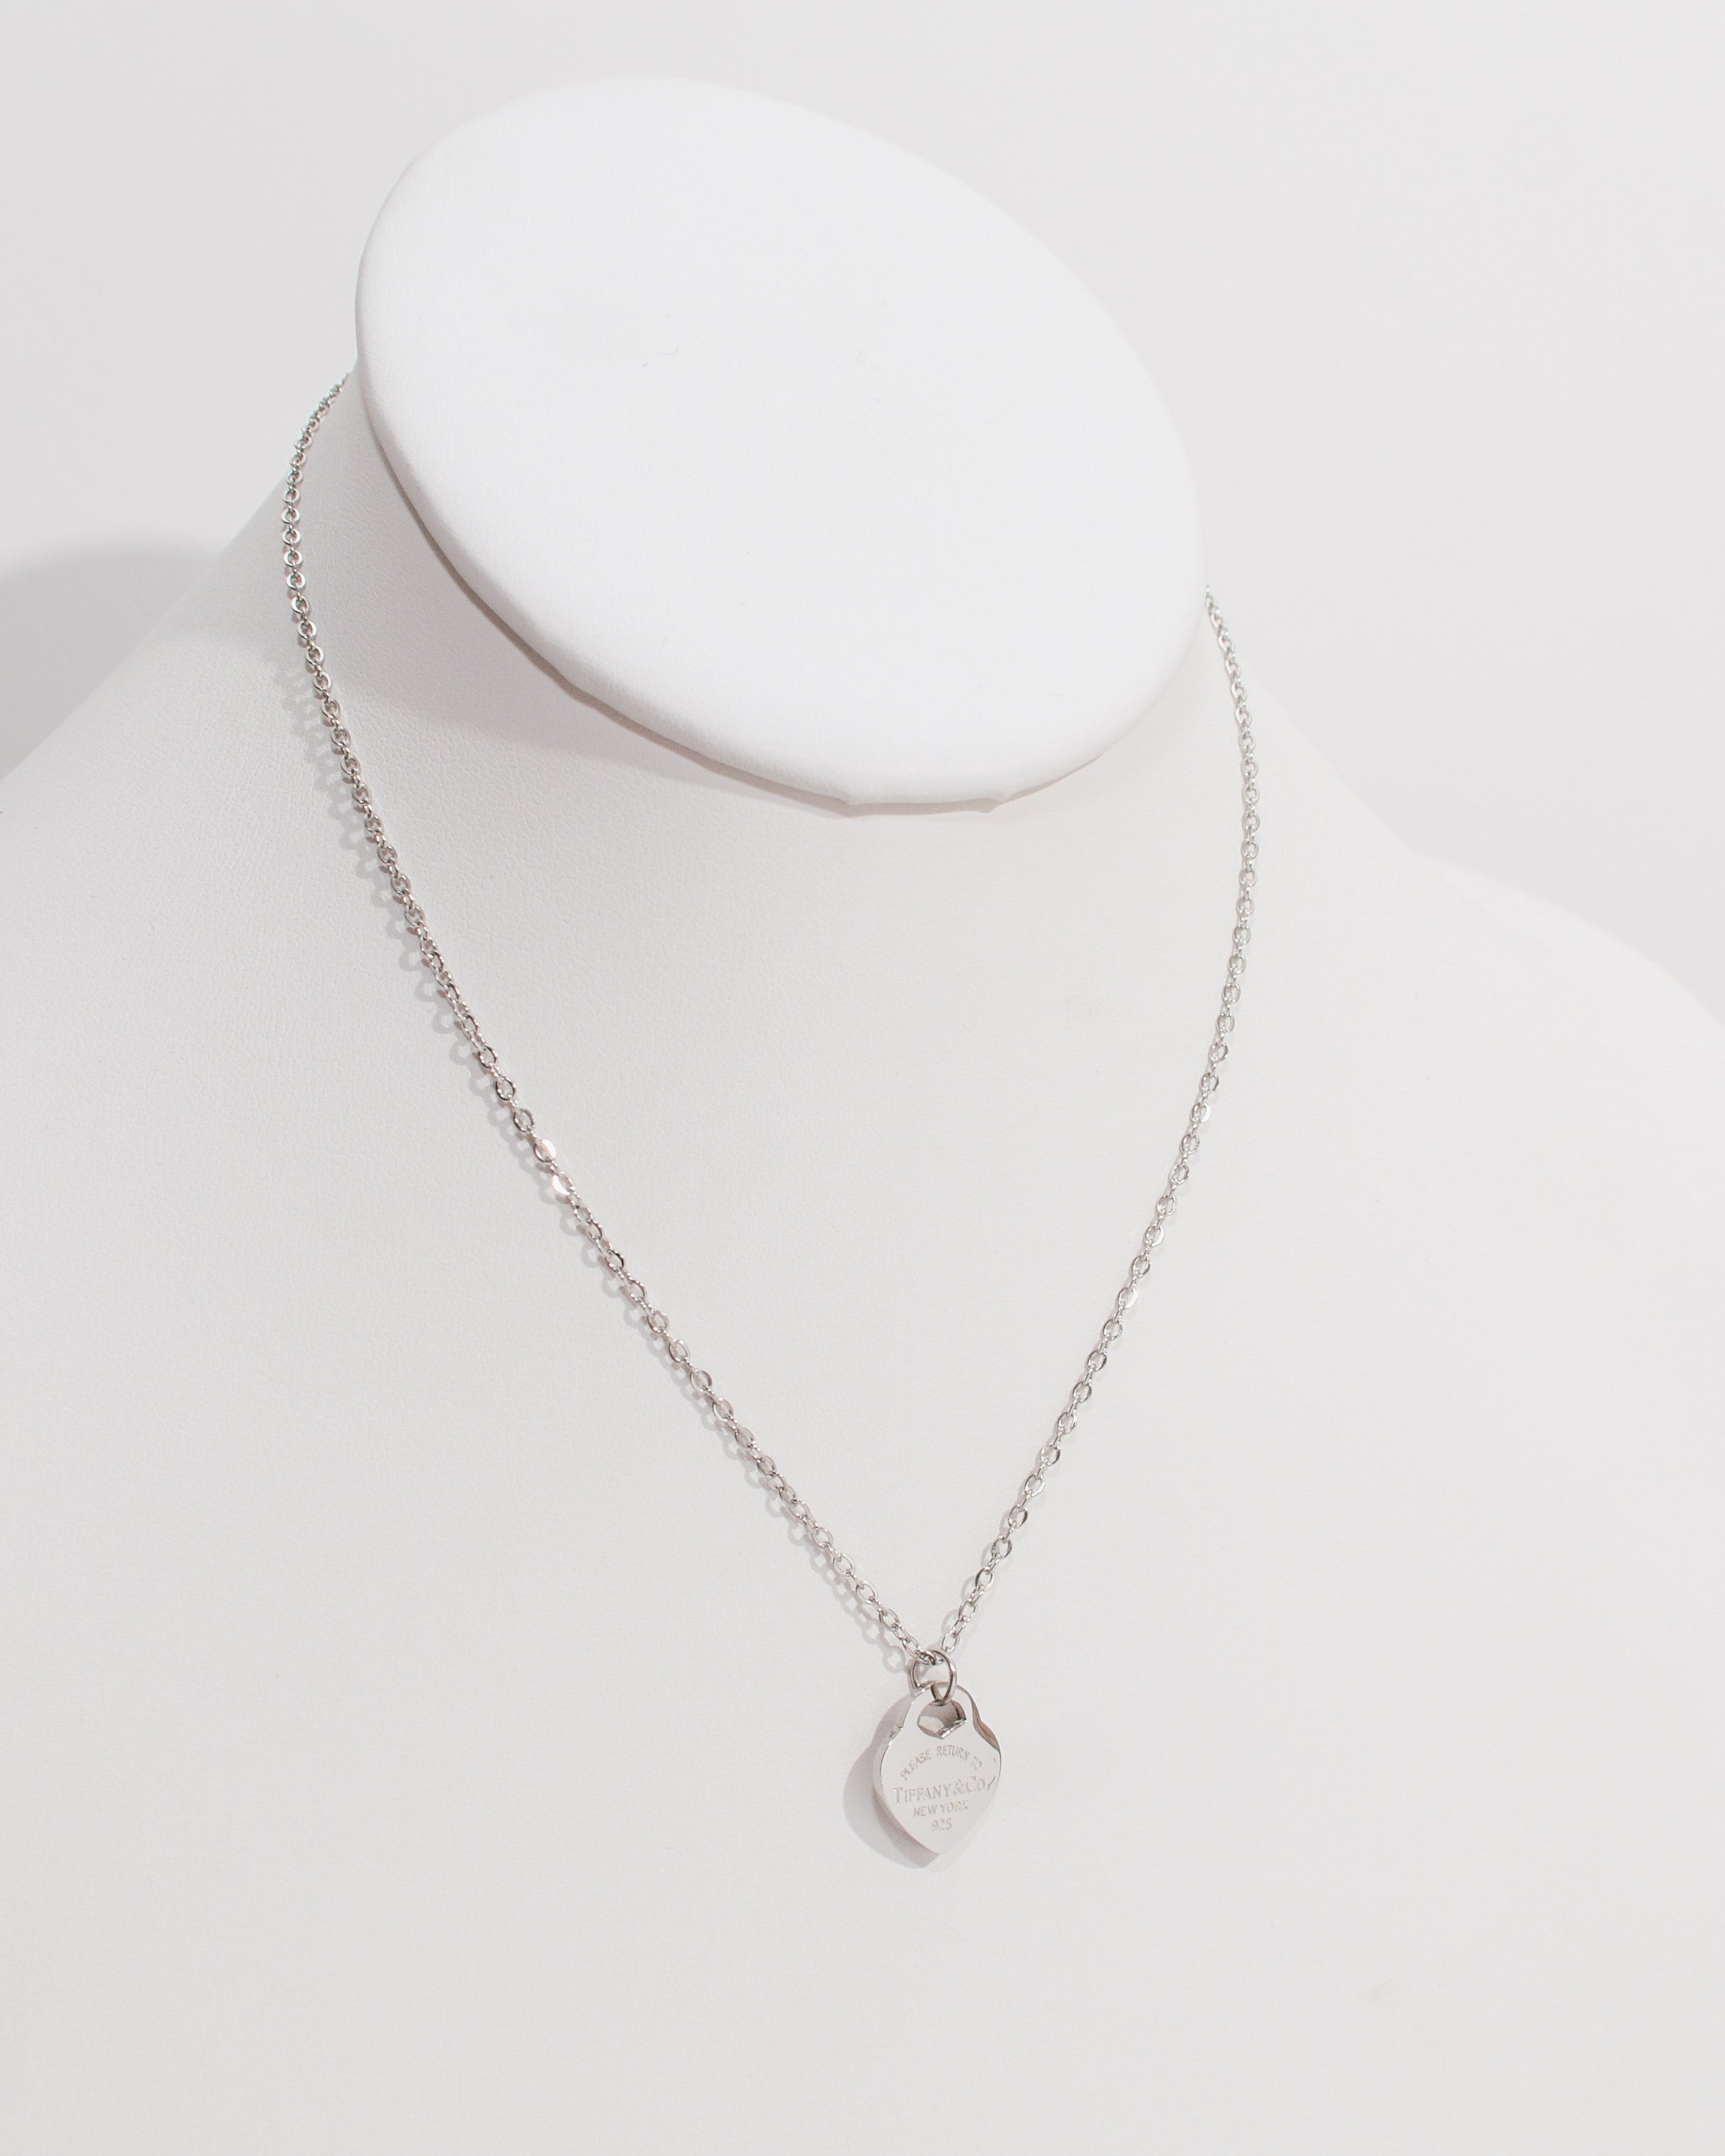 TIFFANY Sterling Silver Return to Tiffany Heart Tag Pendant Necklace  1136740 | FASHIONPHILE